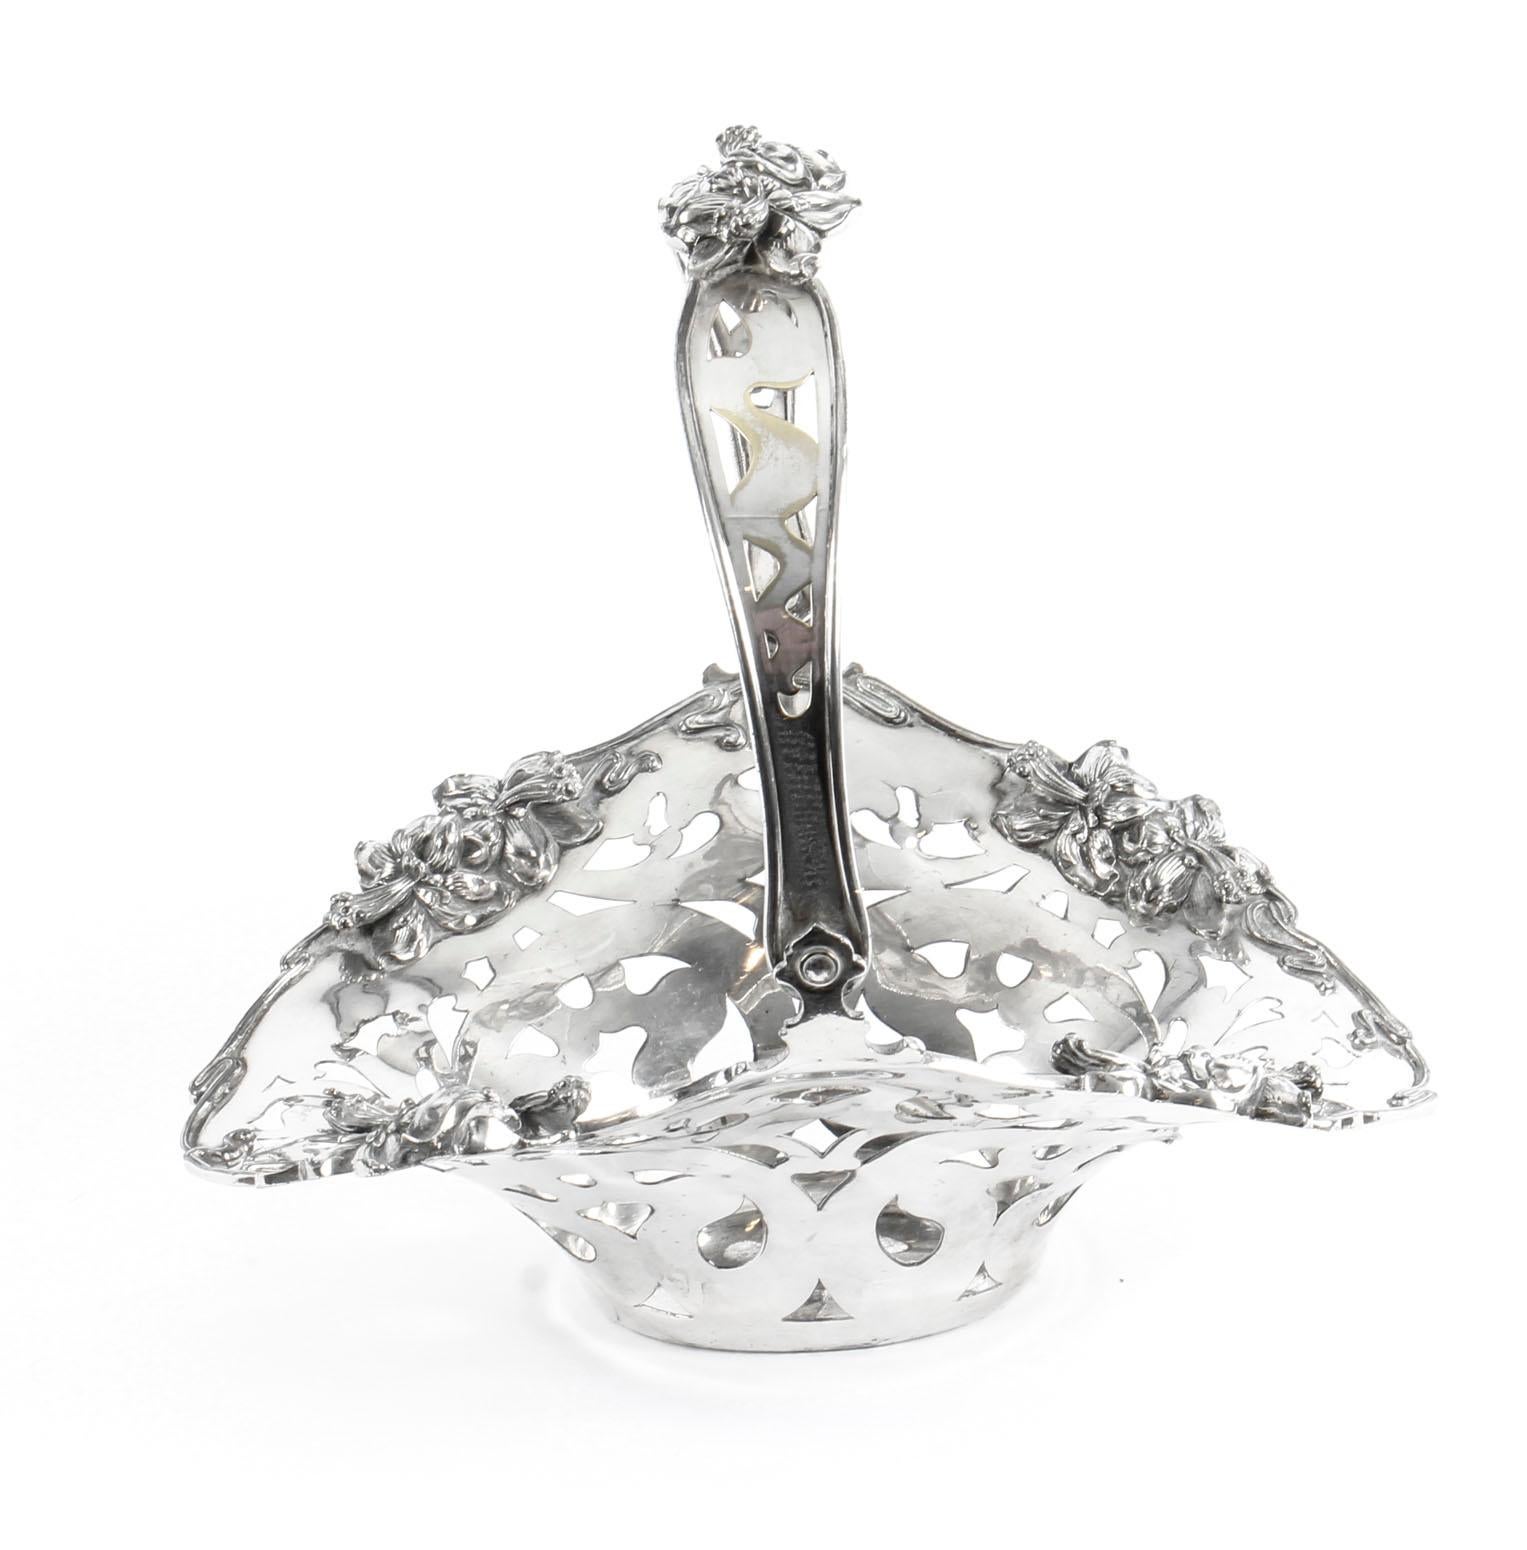 This is a stunning American Art Nouveau silver plated swing handle fruit basket, made in 1904.

The tray has the stamp of the highly sought after silversmiths, The Meriden Silver Plate Co., USA.

The basket is oval in shape with fluted sides. It